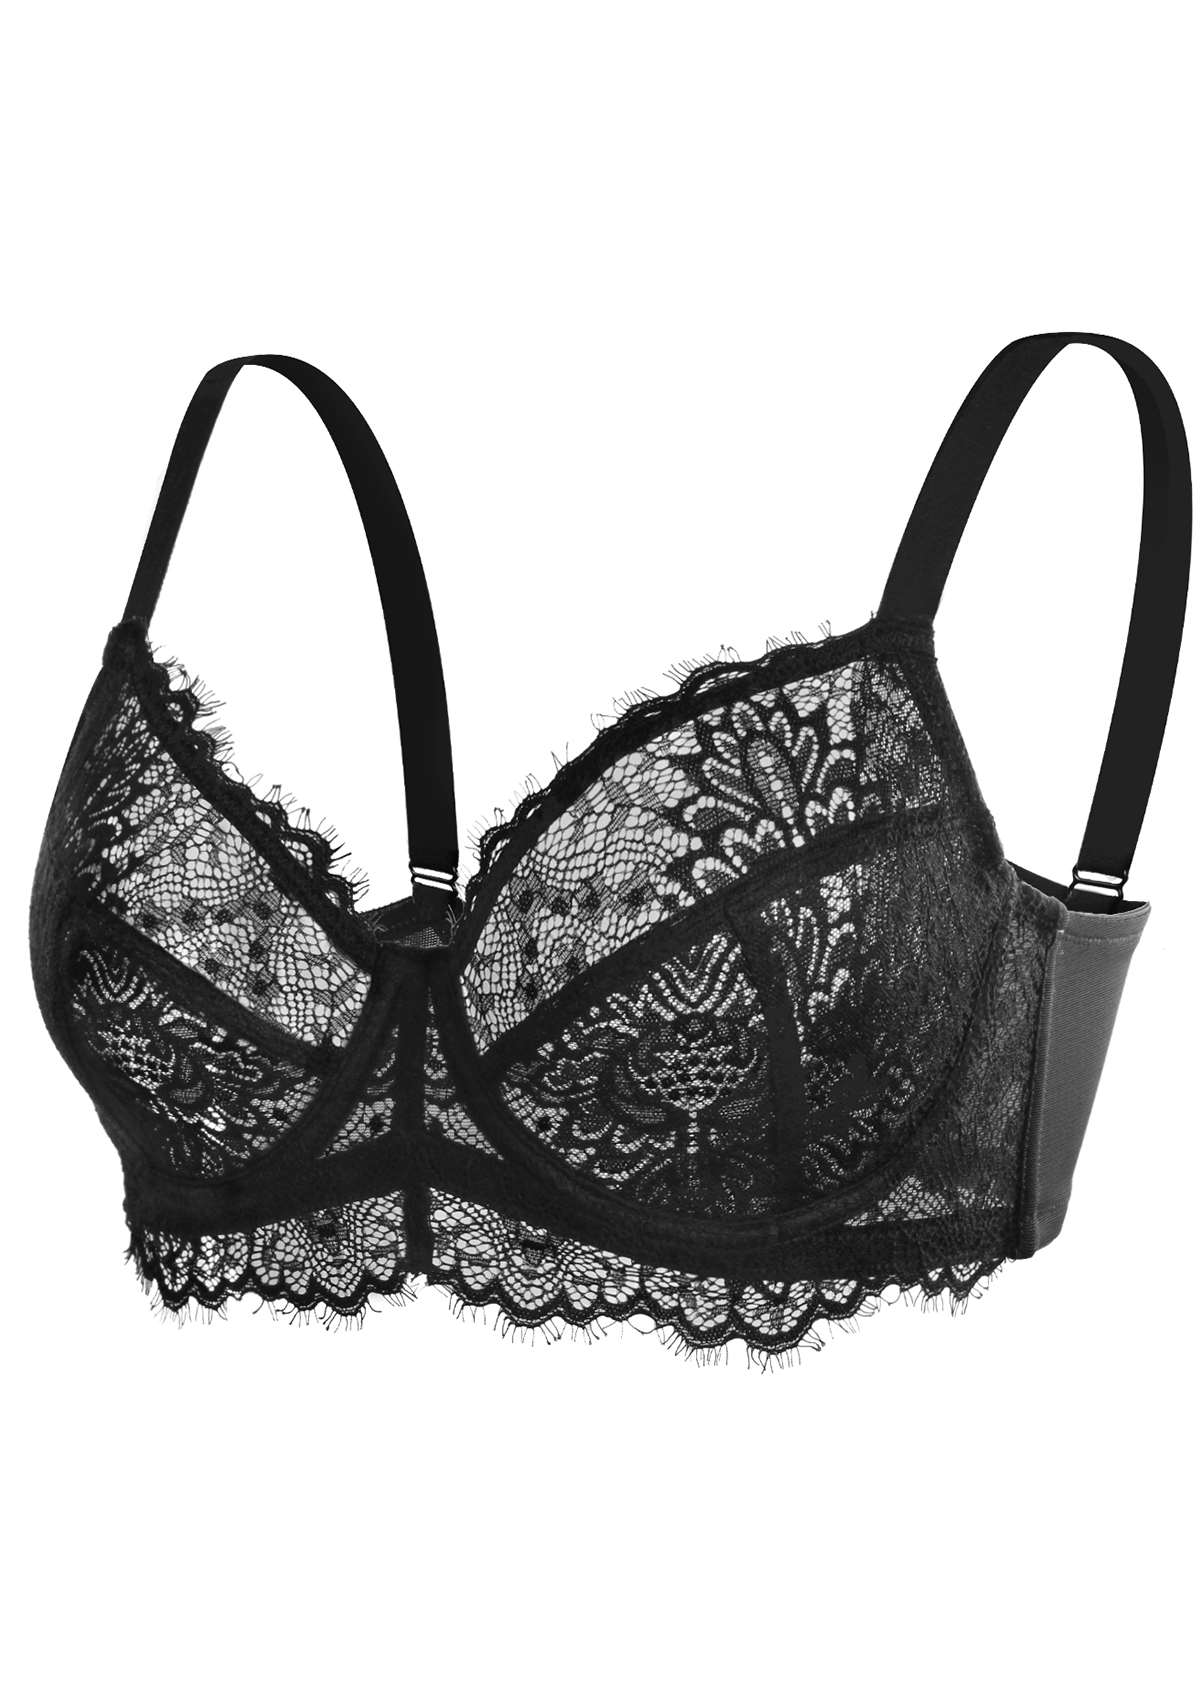 HSIA Sunflower Matching Bra And Underwear: Back And Side Smoothing Bra - Black / 34 / H